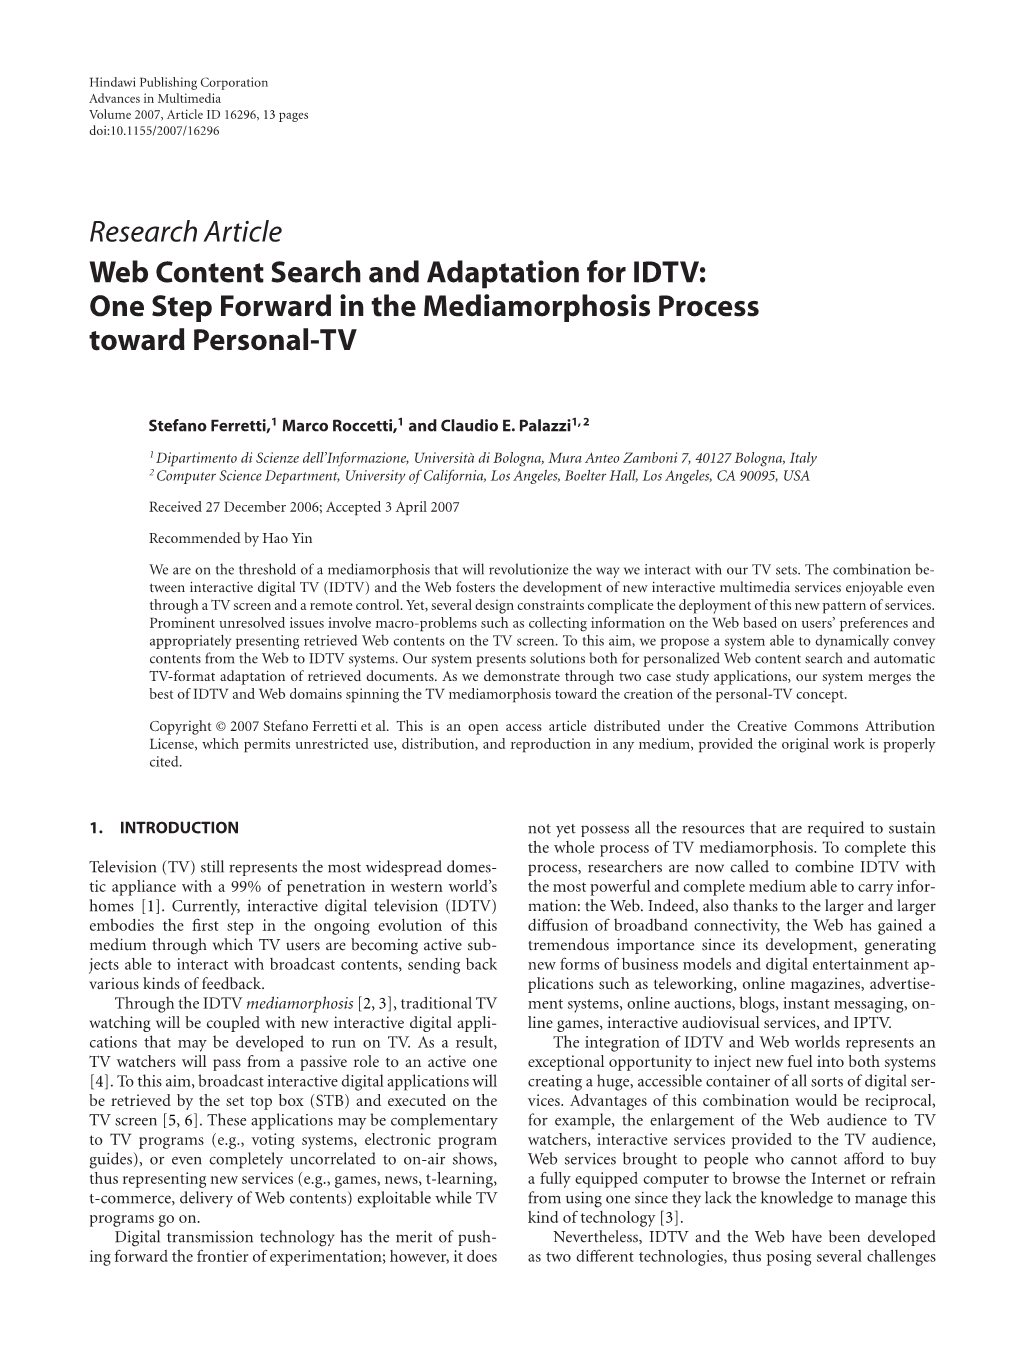 Web Content Search and Adaptation for IDTV: One Step Forward in the Mediamorphosis Process Toward Personal-TV